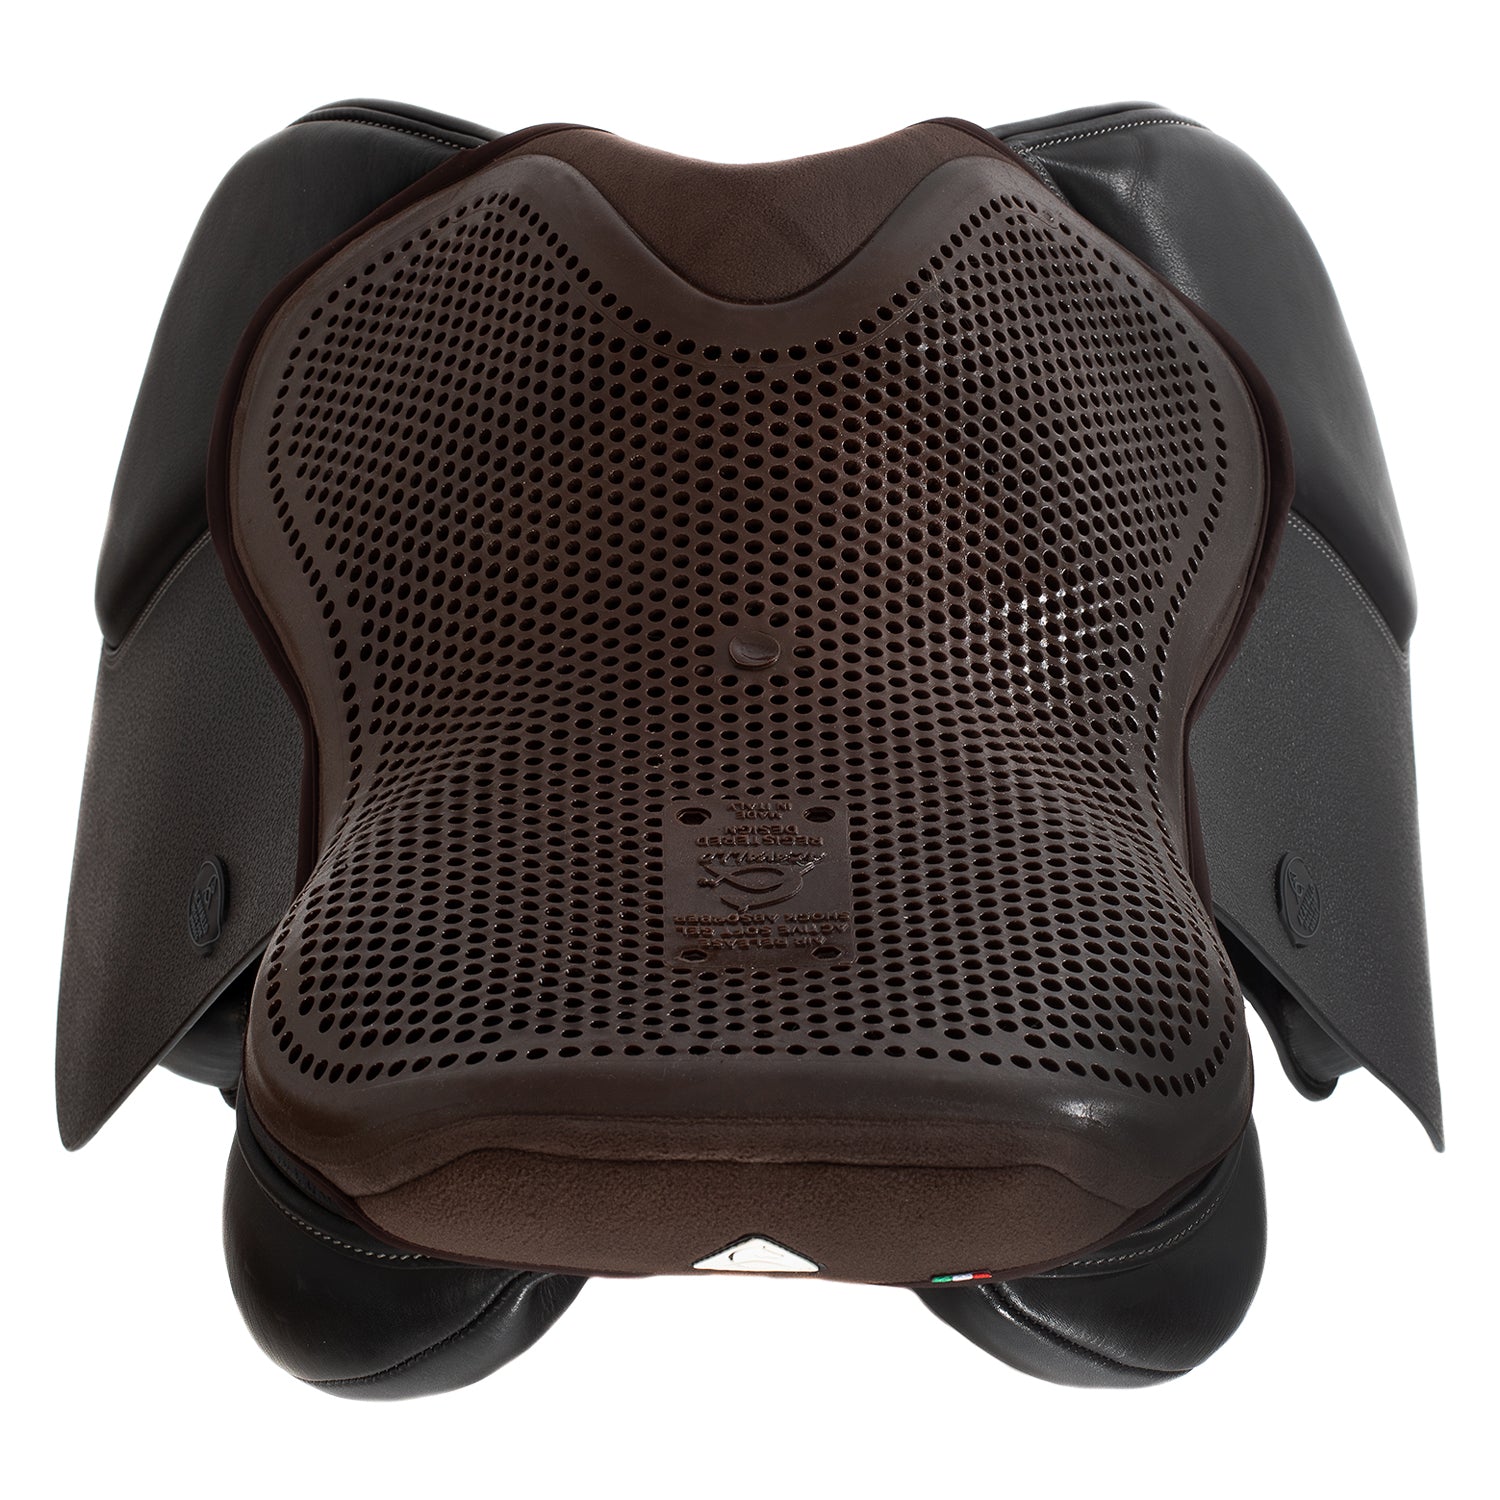 Saddle seat protector for hip pain